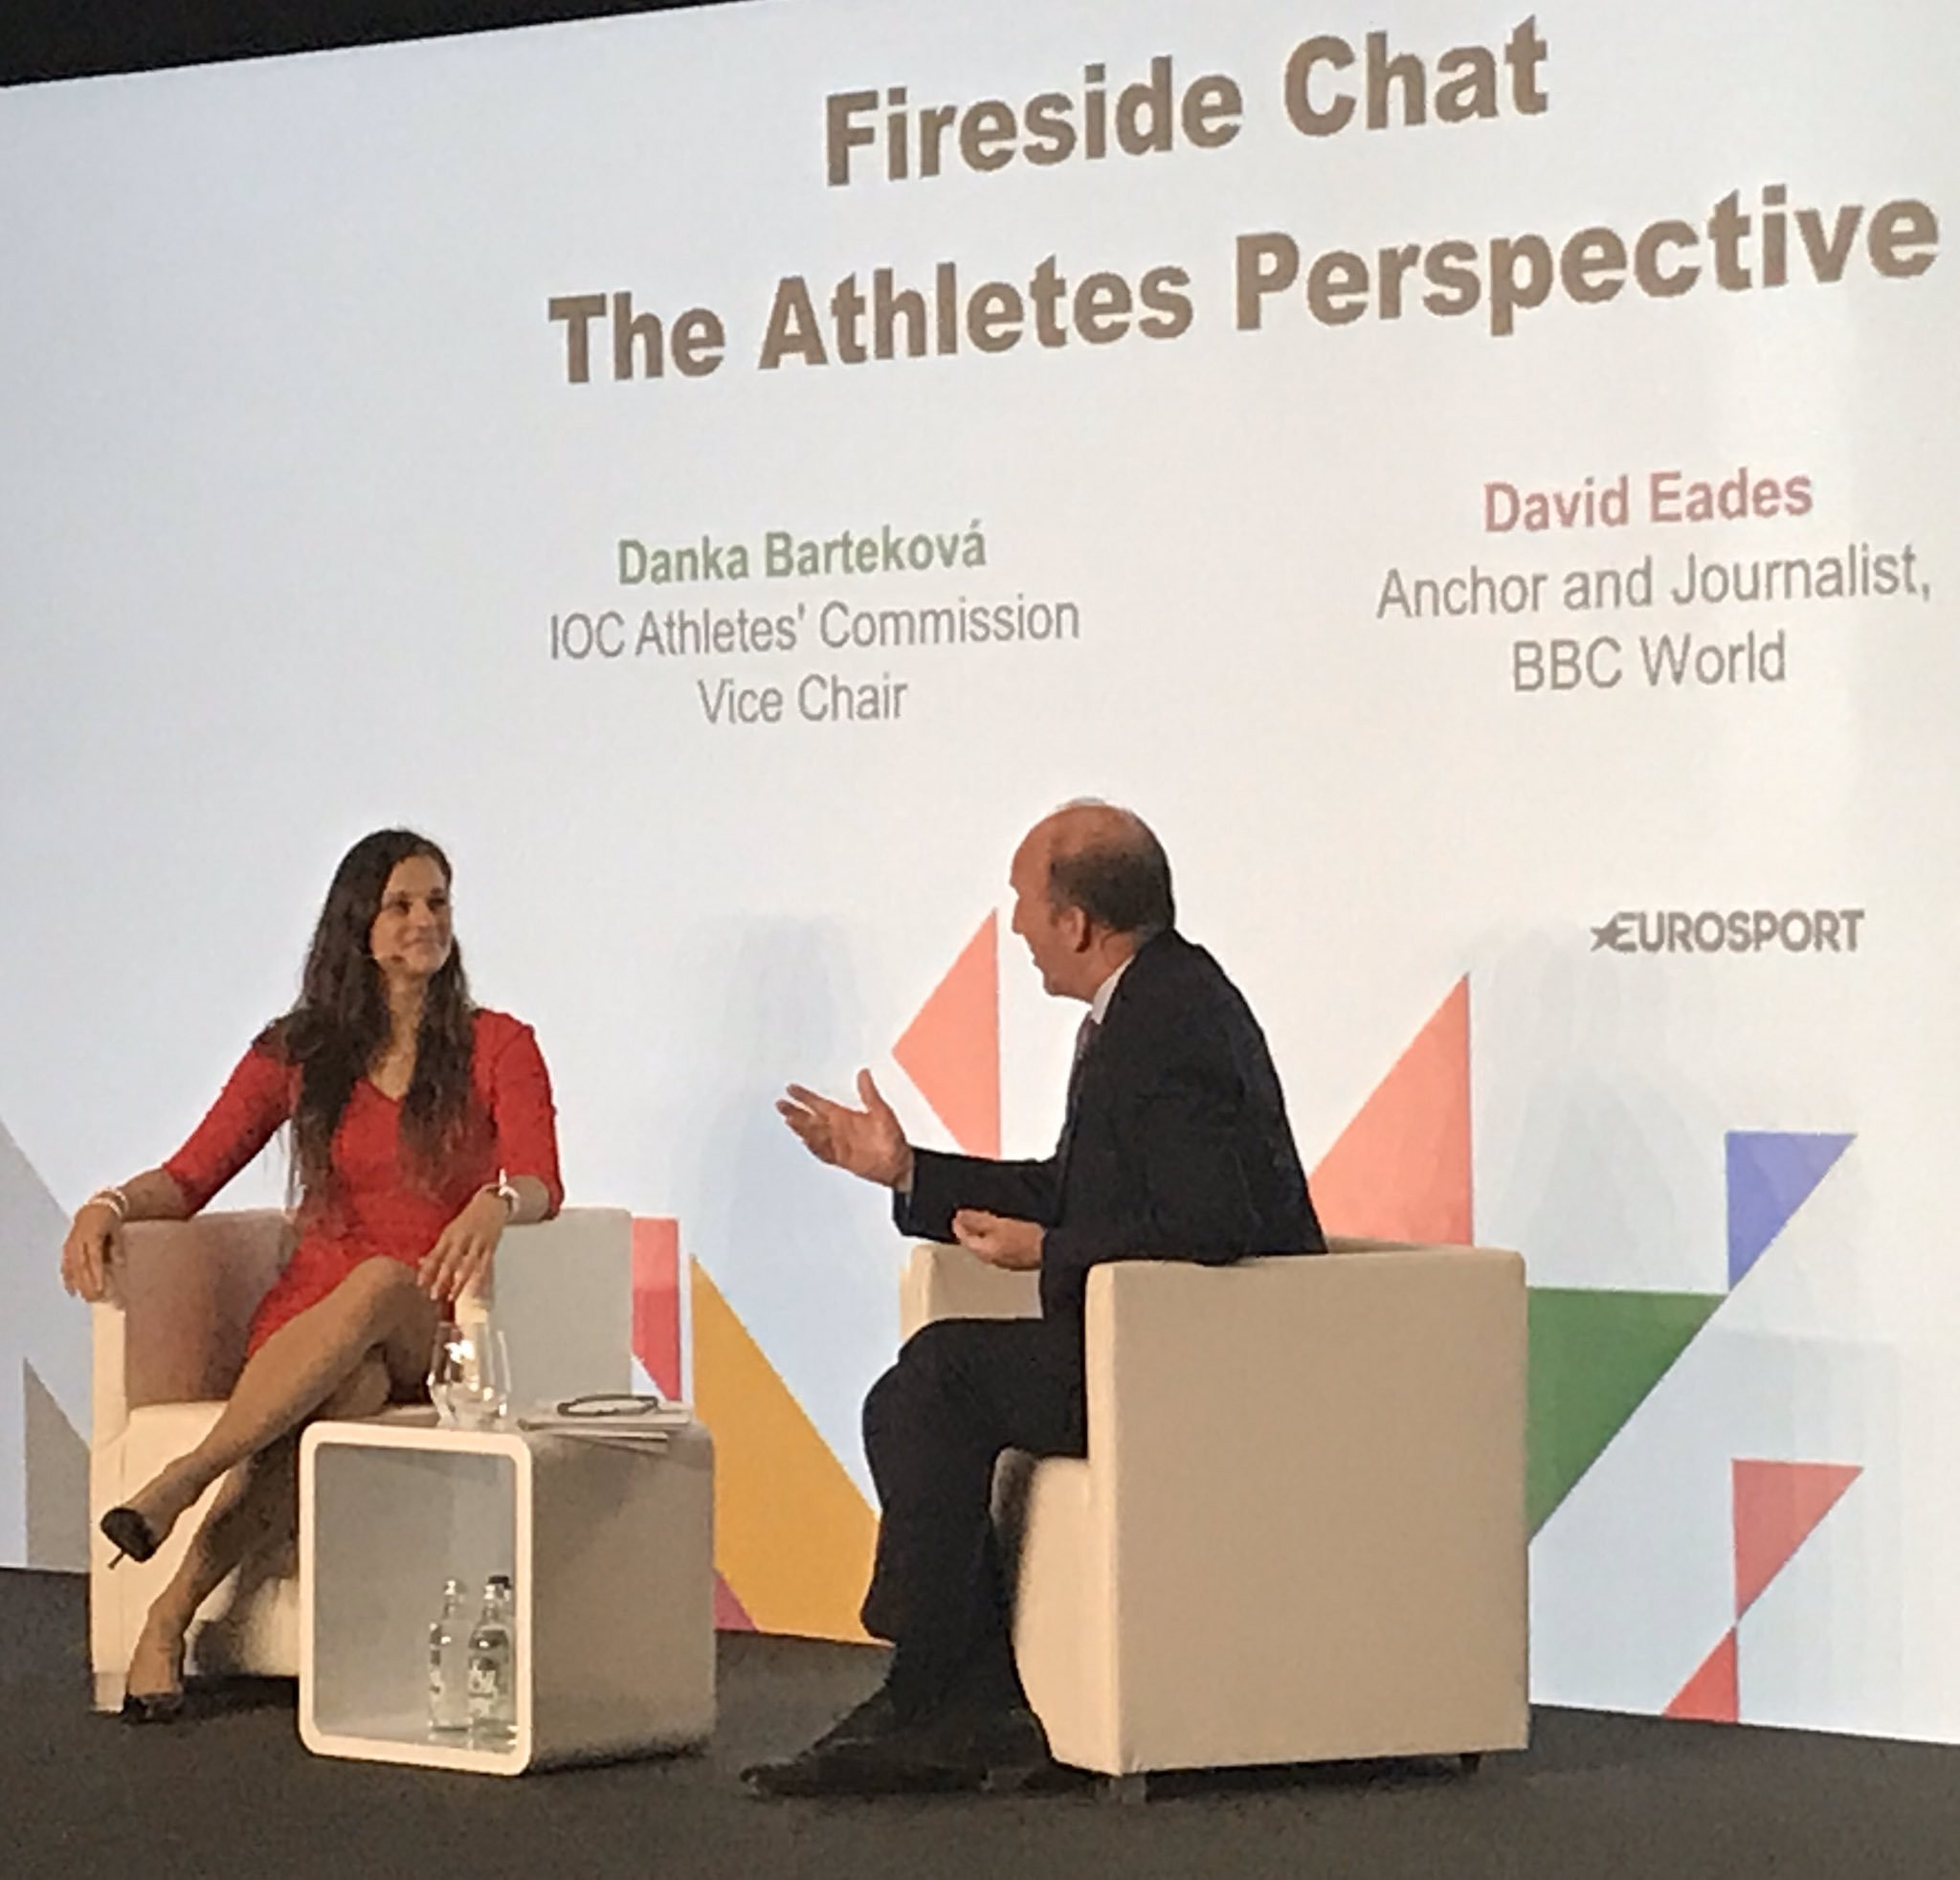 IOC Athletes' Commission and Olympic shooting bronze medallist Danka Barteková took part in a fireside chat with BBC presenter David Eades ©Twitter